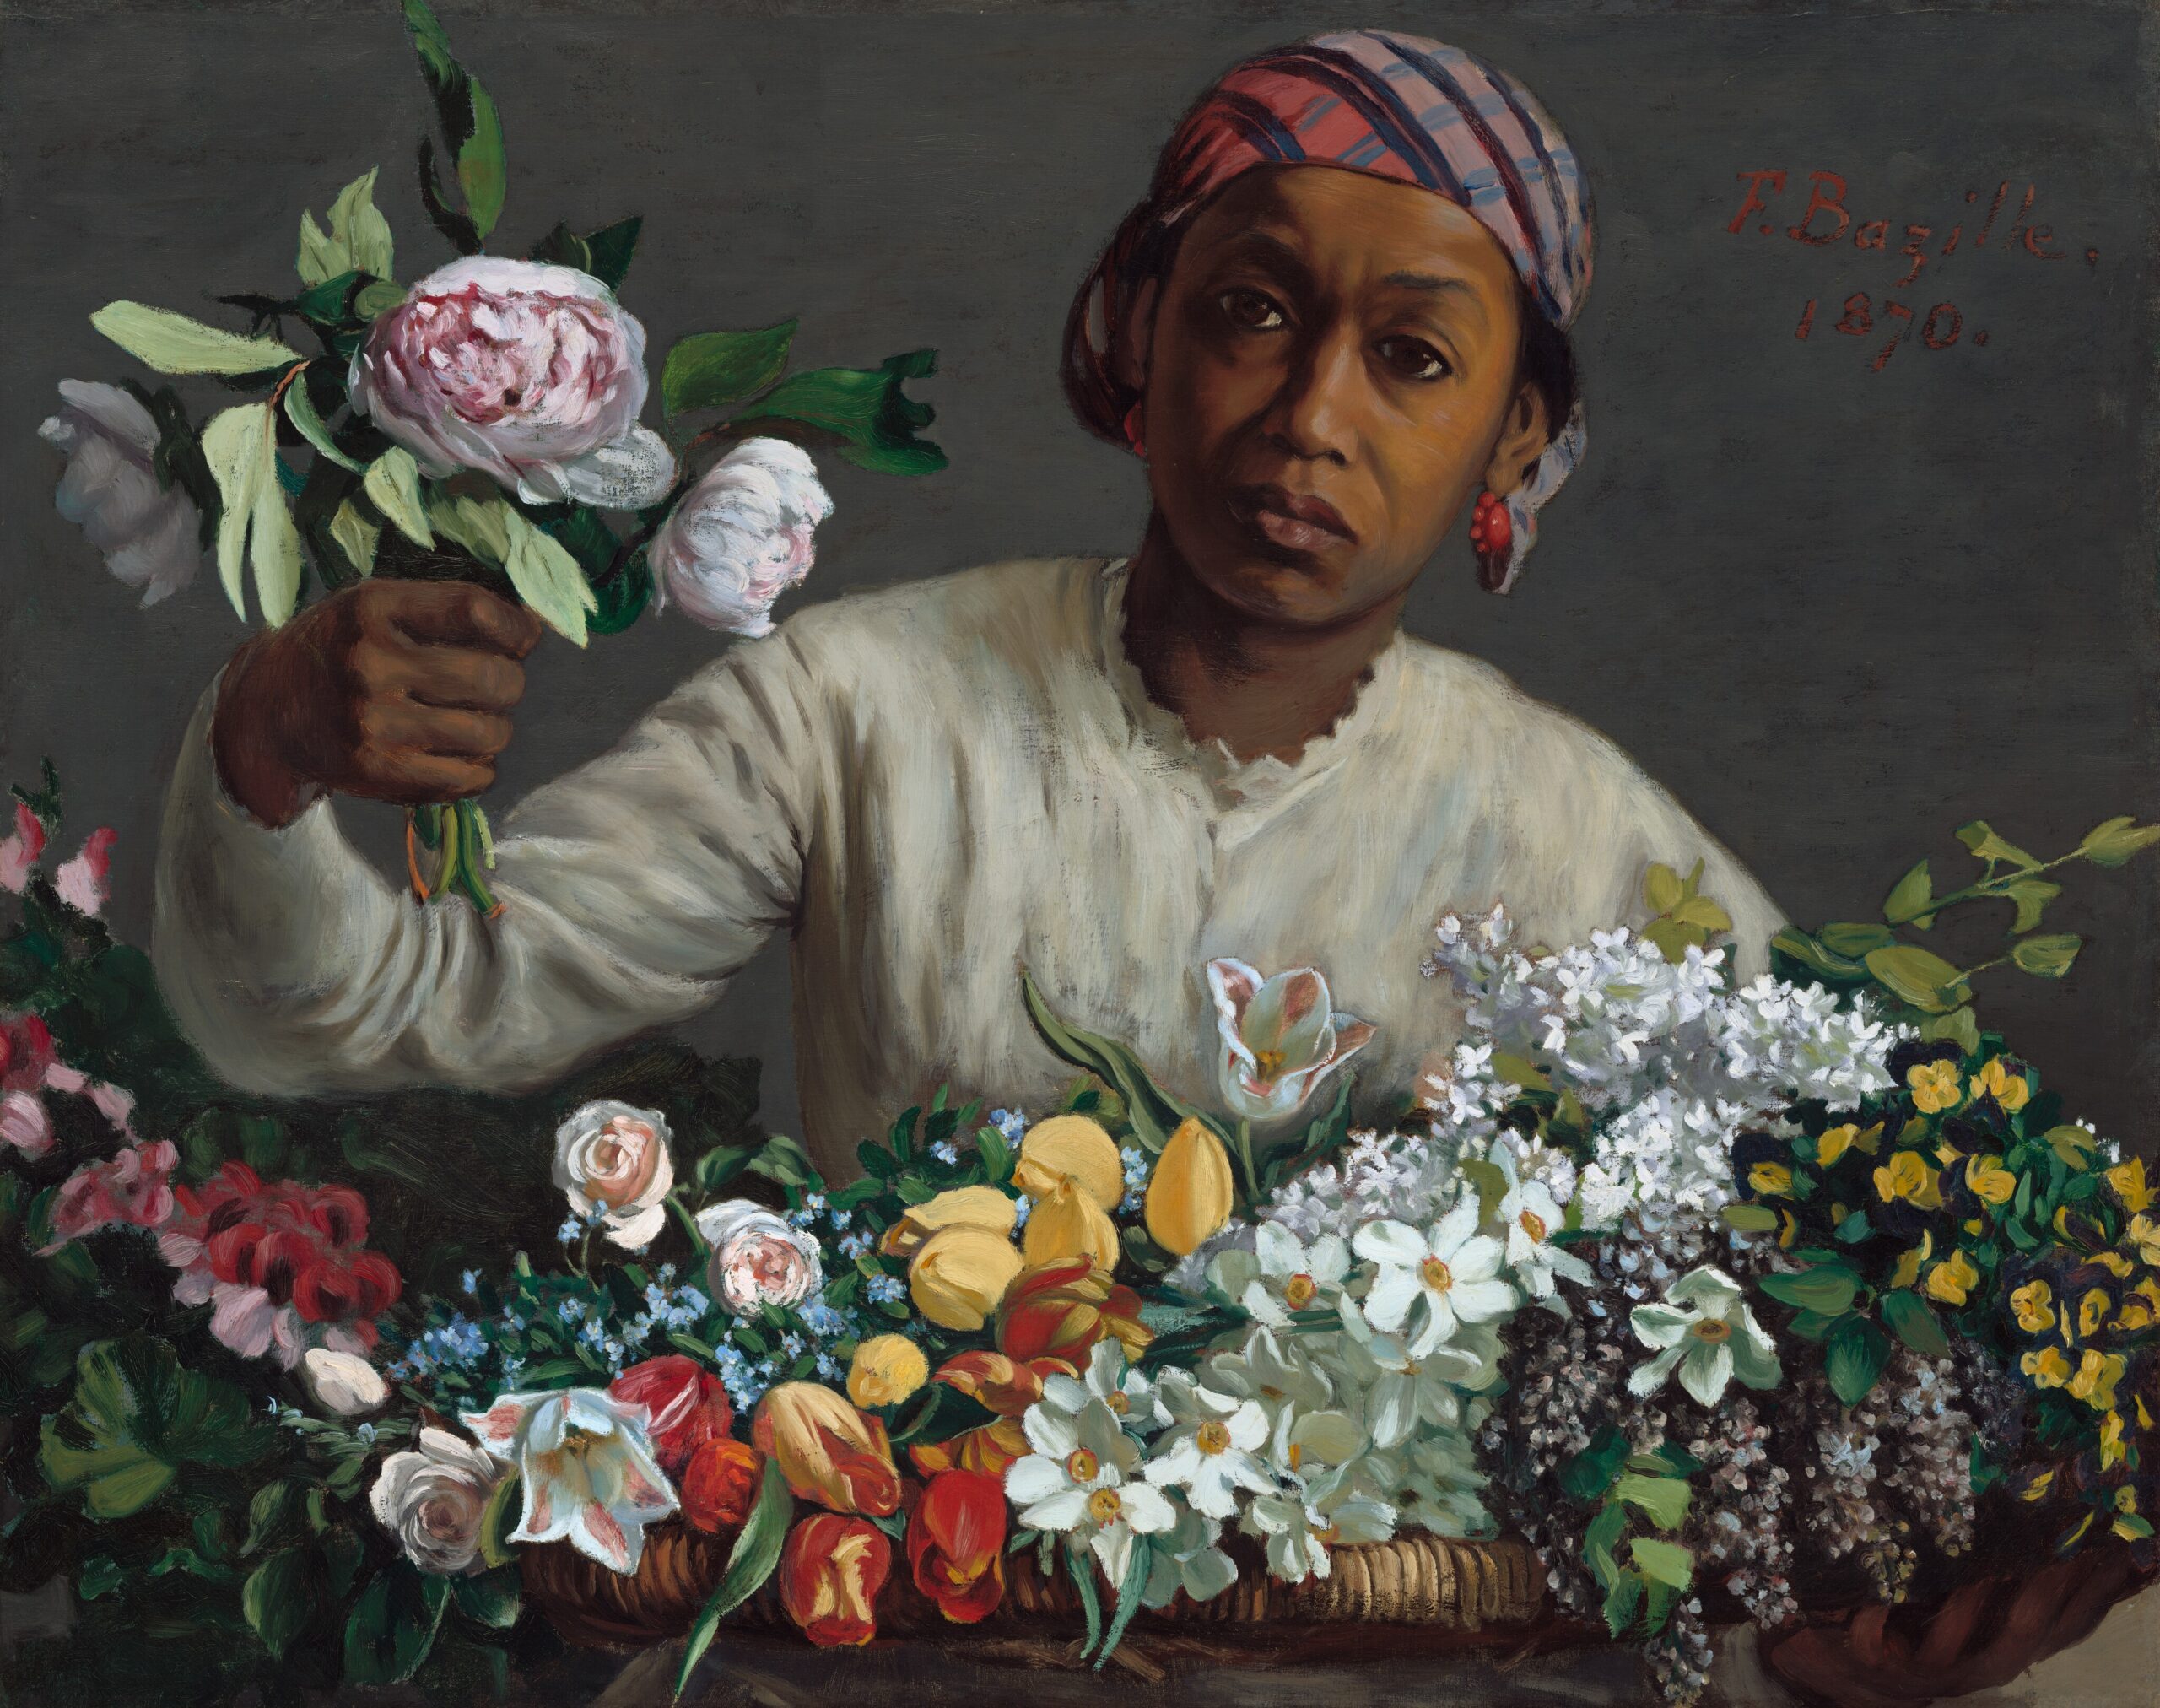 Young black woman in white dress with many flowers around her.